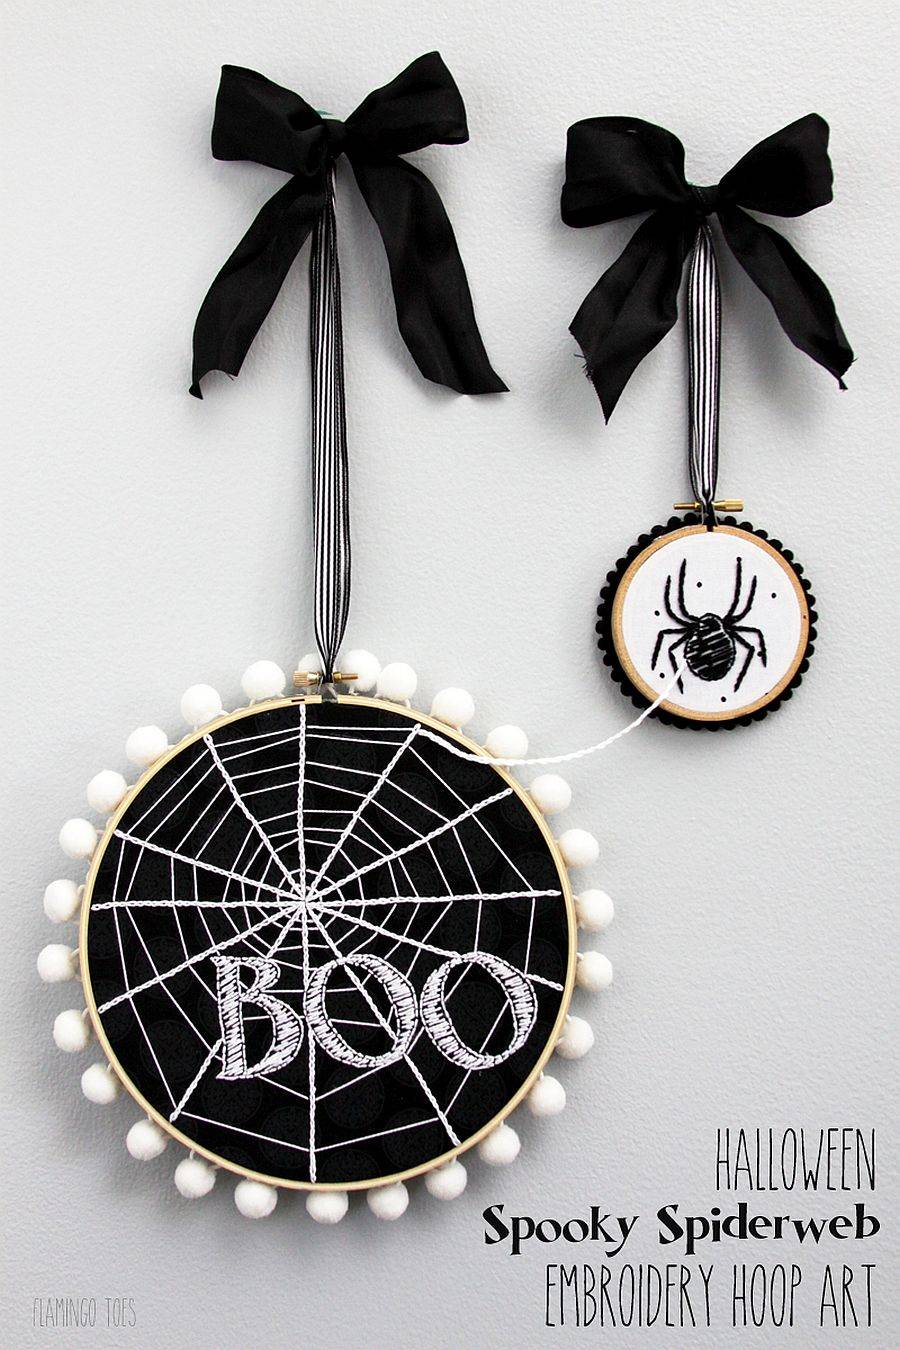 Try-out-the-Spooky-Spiderweb-Embroidery-Hoop-Art-for-a-minimal-Halloween-99184